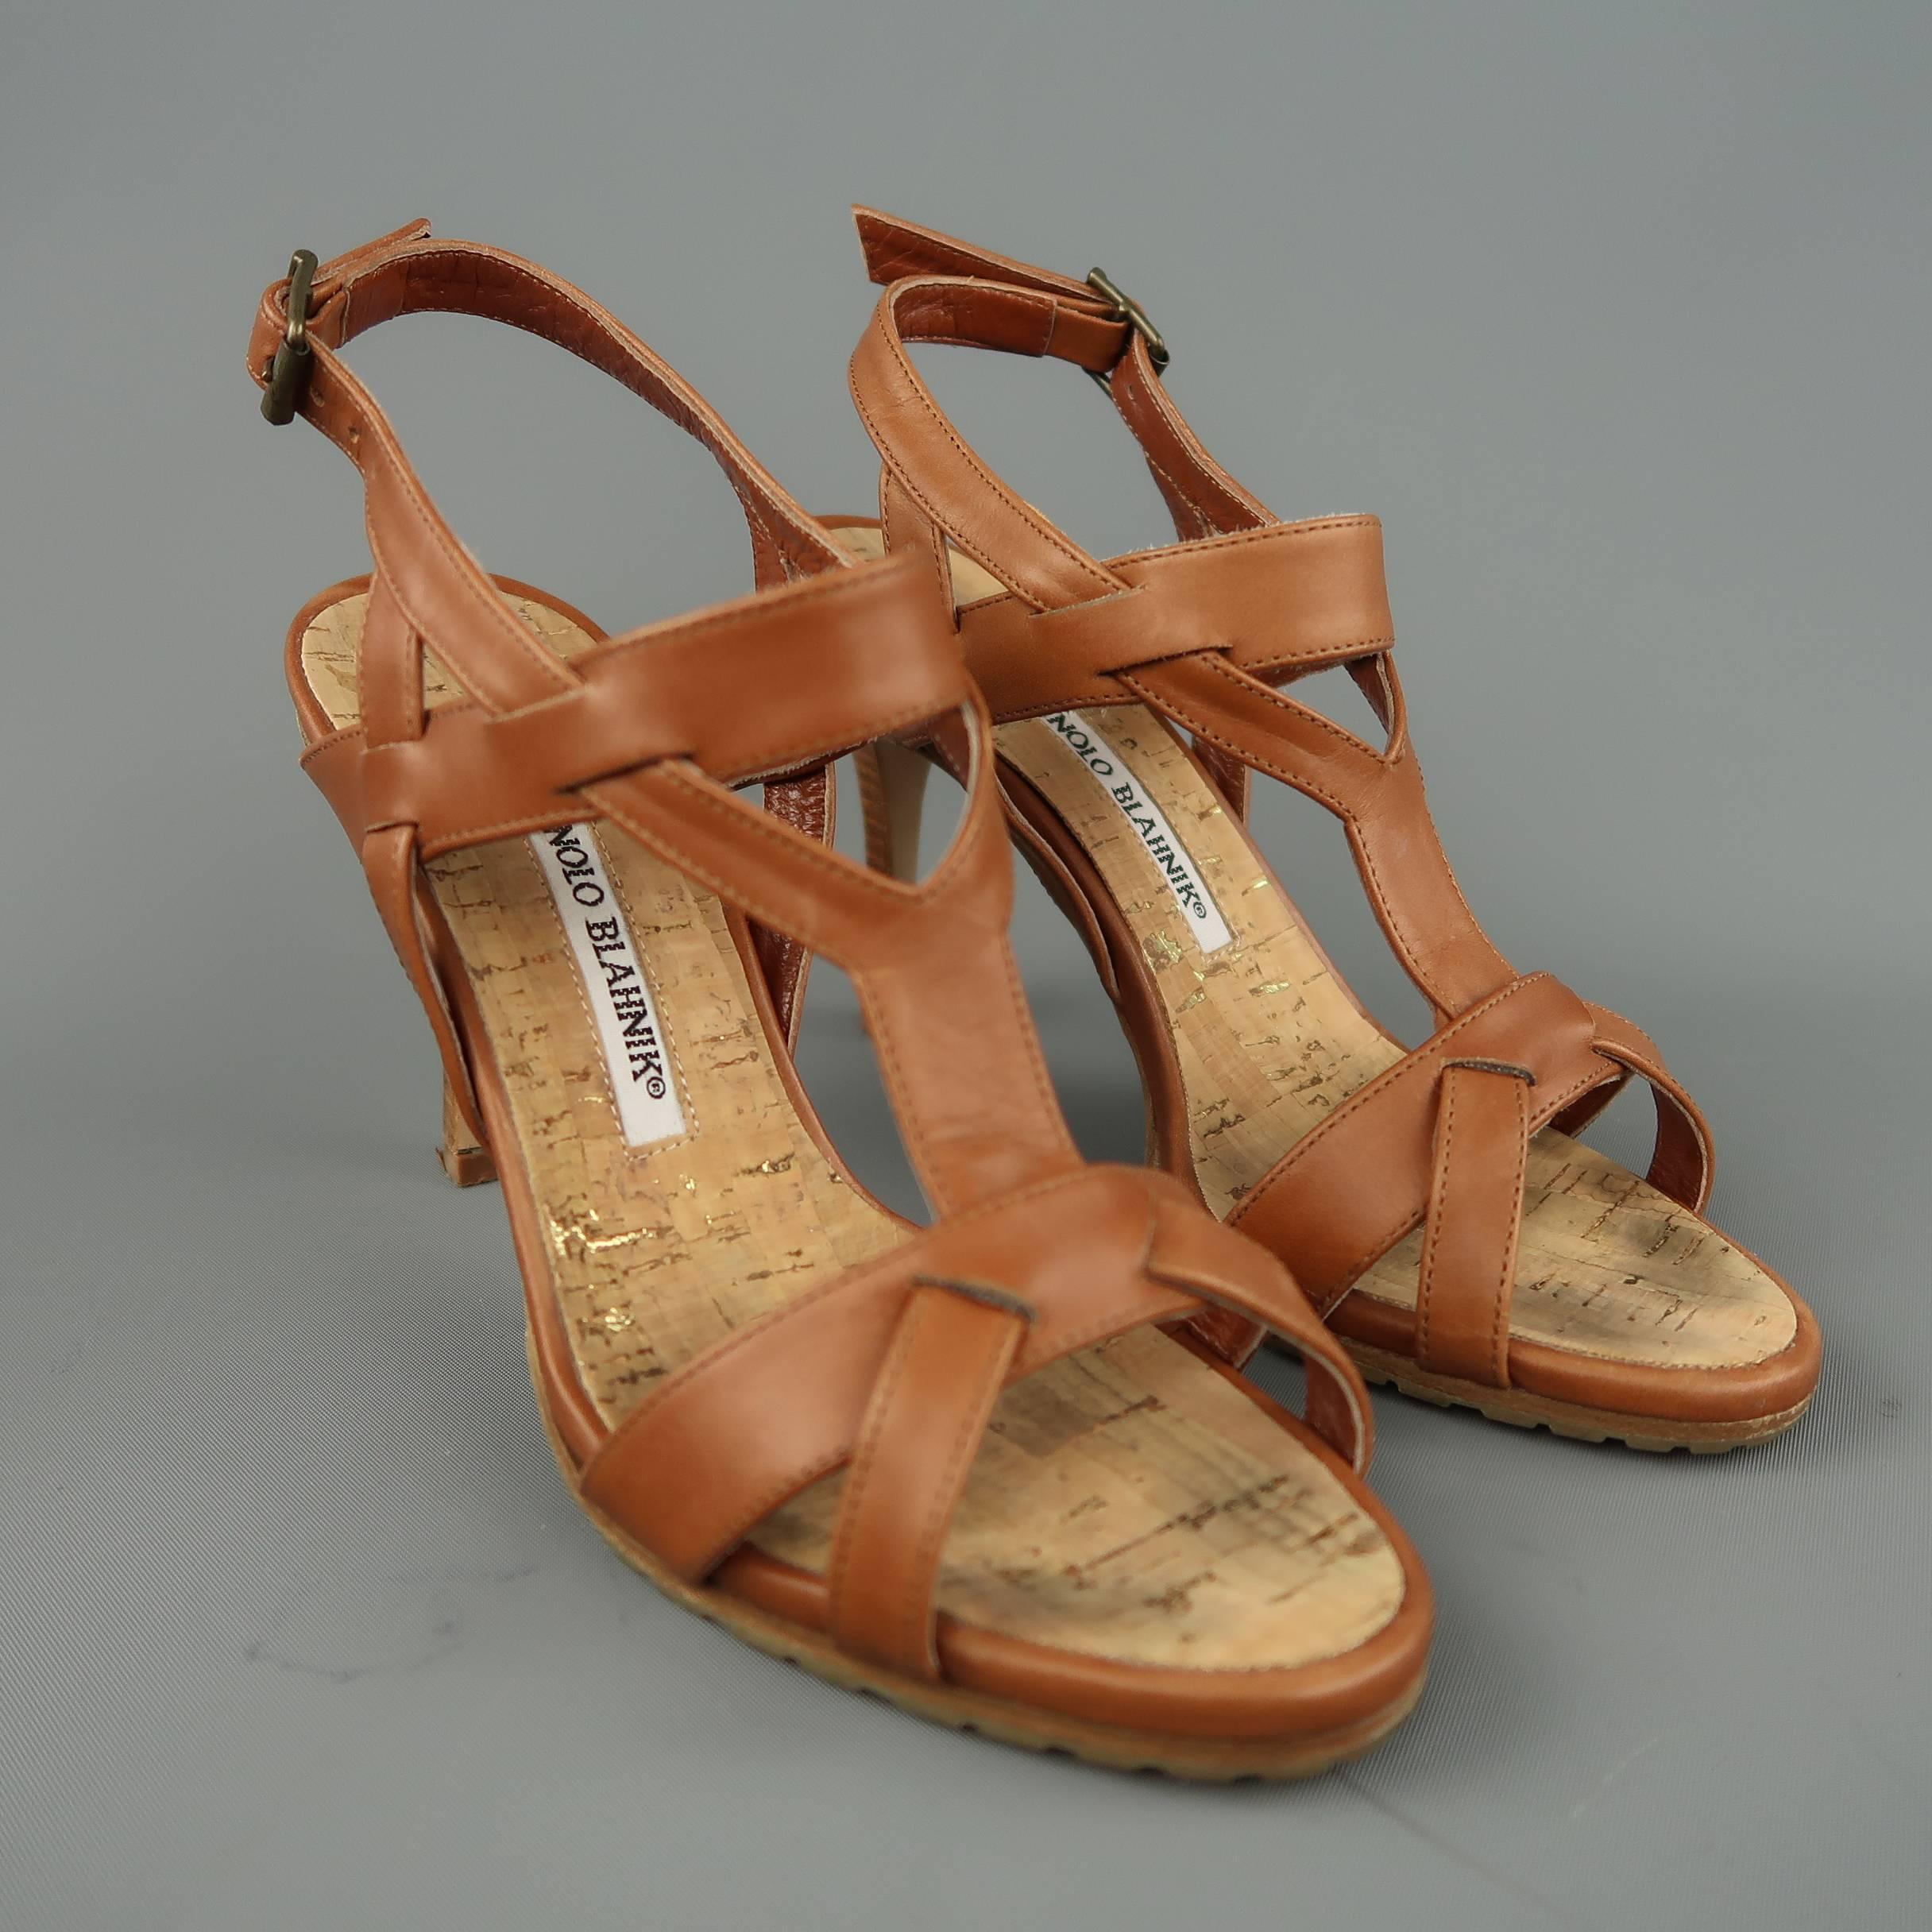 MANOLO BLAHNIK sandals come in tan leather with a strappy Y harness, cork sole, and stacked stiletto heel. Made in Italy.
 
Good Pre-Owned Condition.
Marked: IT 35.5
 
Measurements:
 
Heel: 3.75 in.
